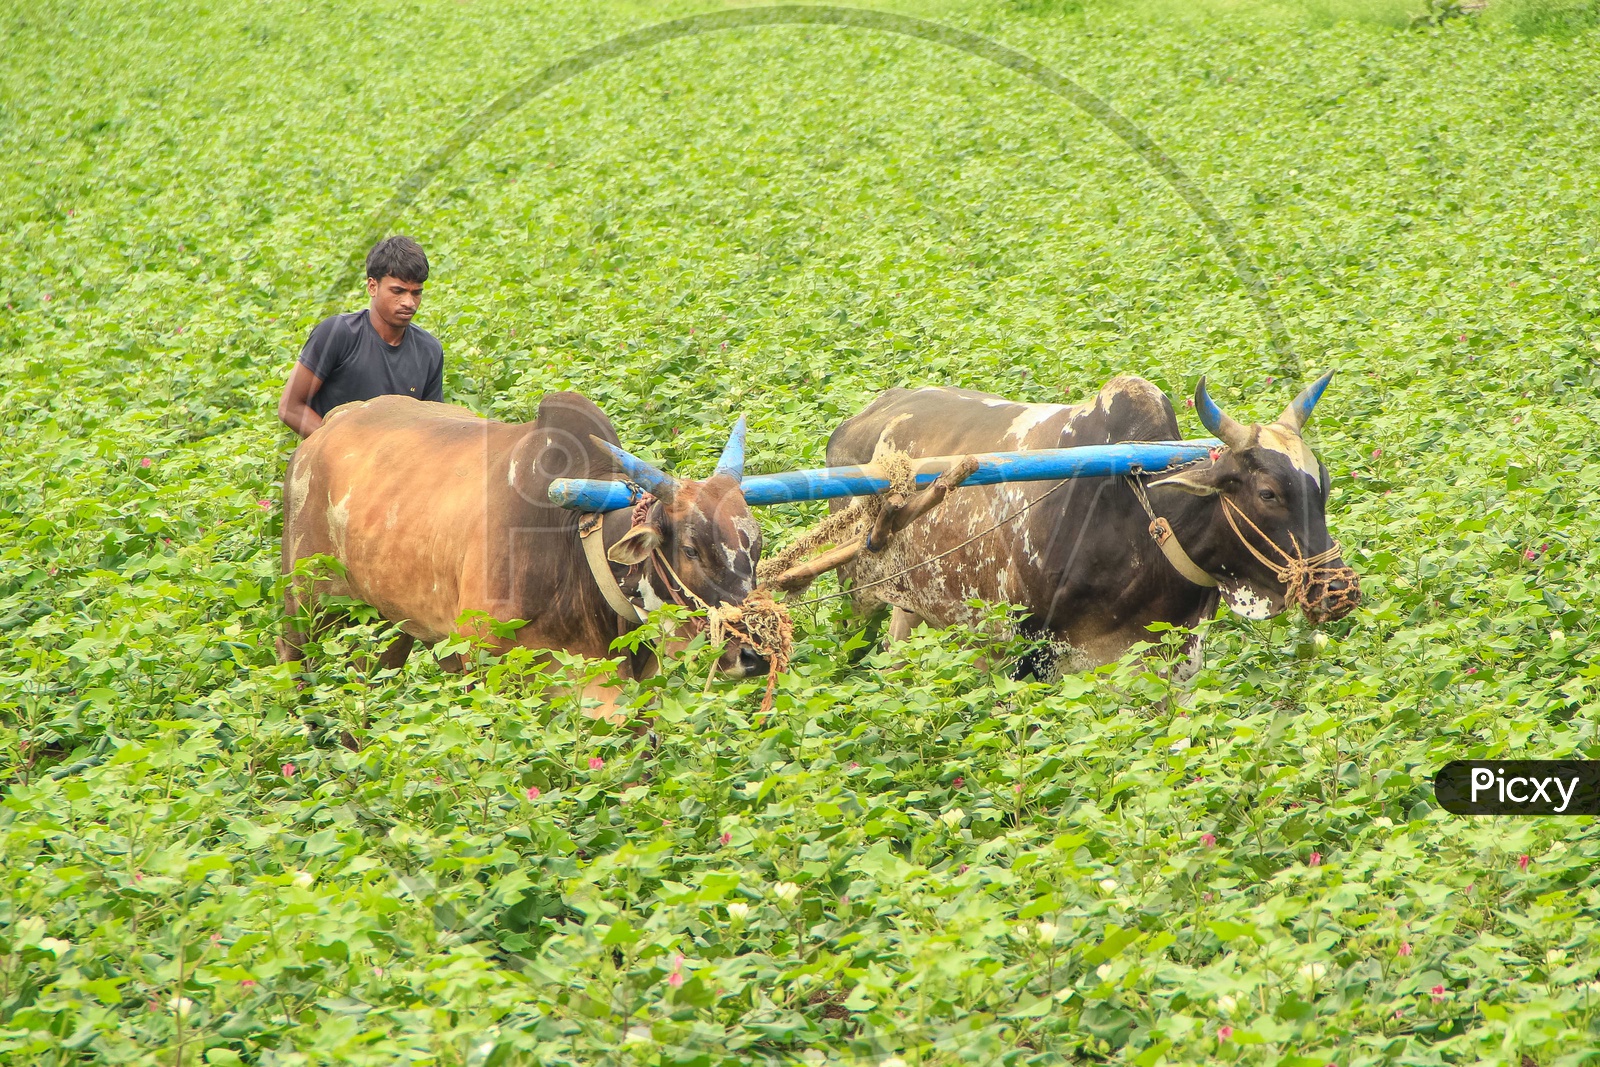 A Young Indian  Farmer Ploughing With Bullocks  in a Farm